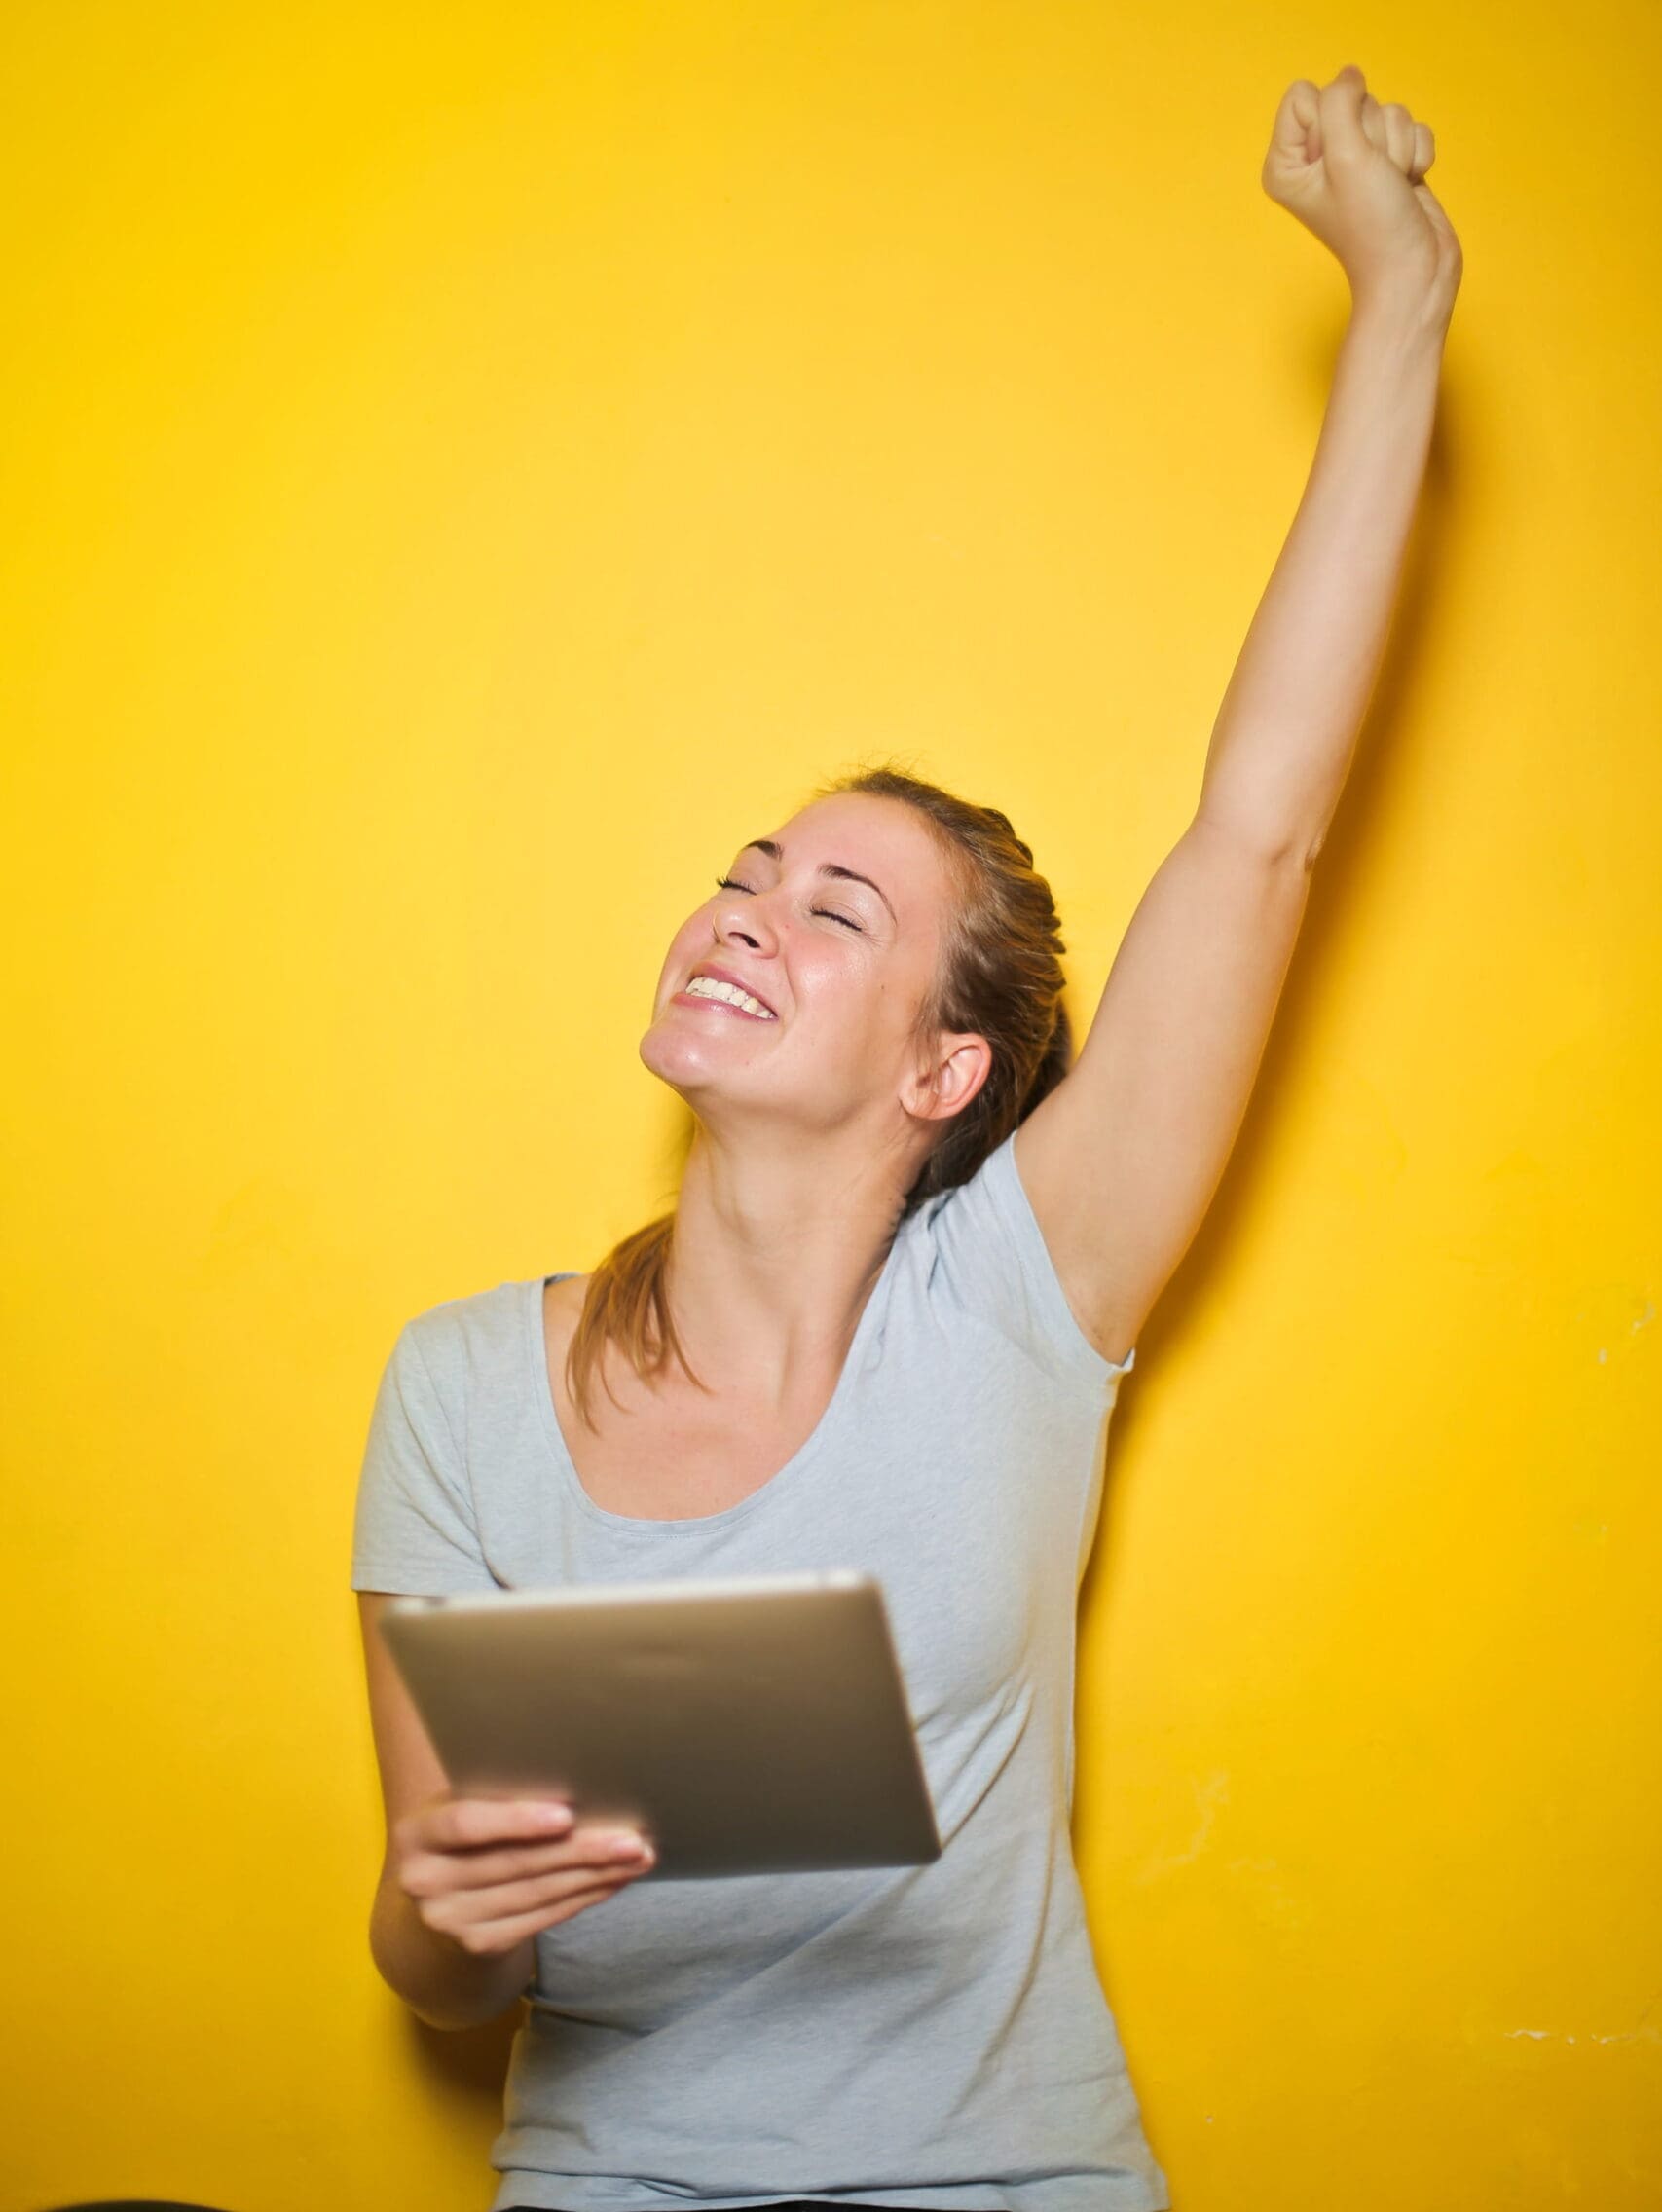 Excited Young Woman Holding An iPad With One Hand Up Against The Yellow Wall